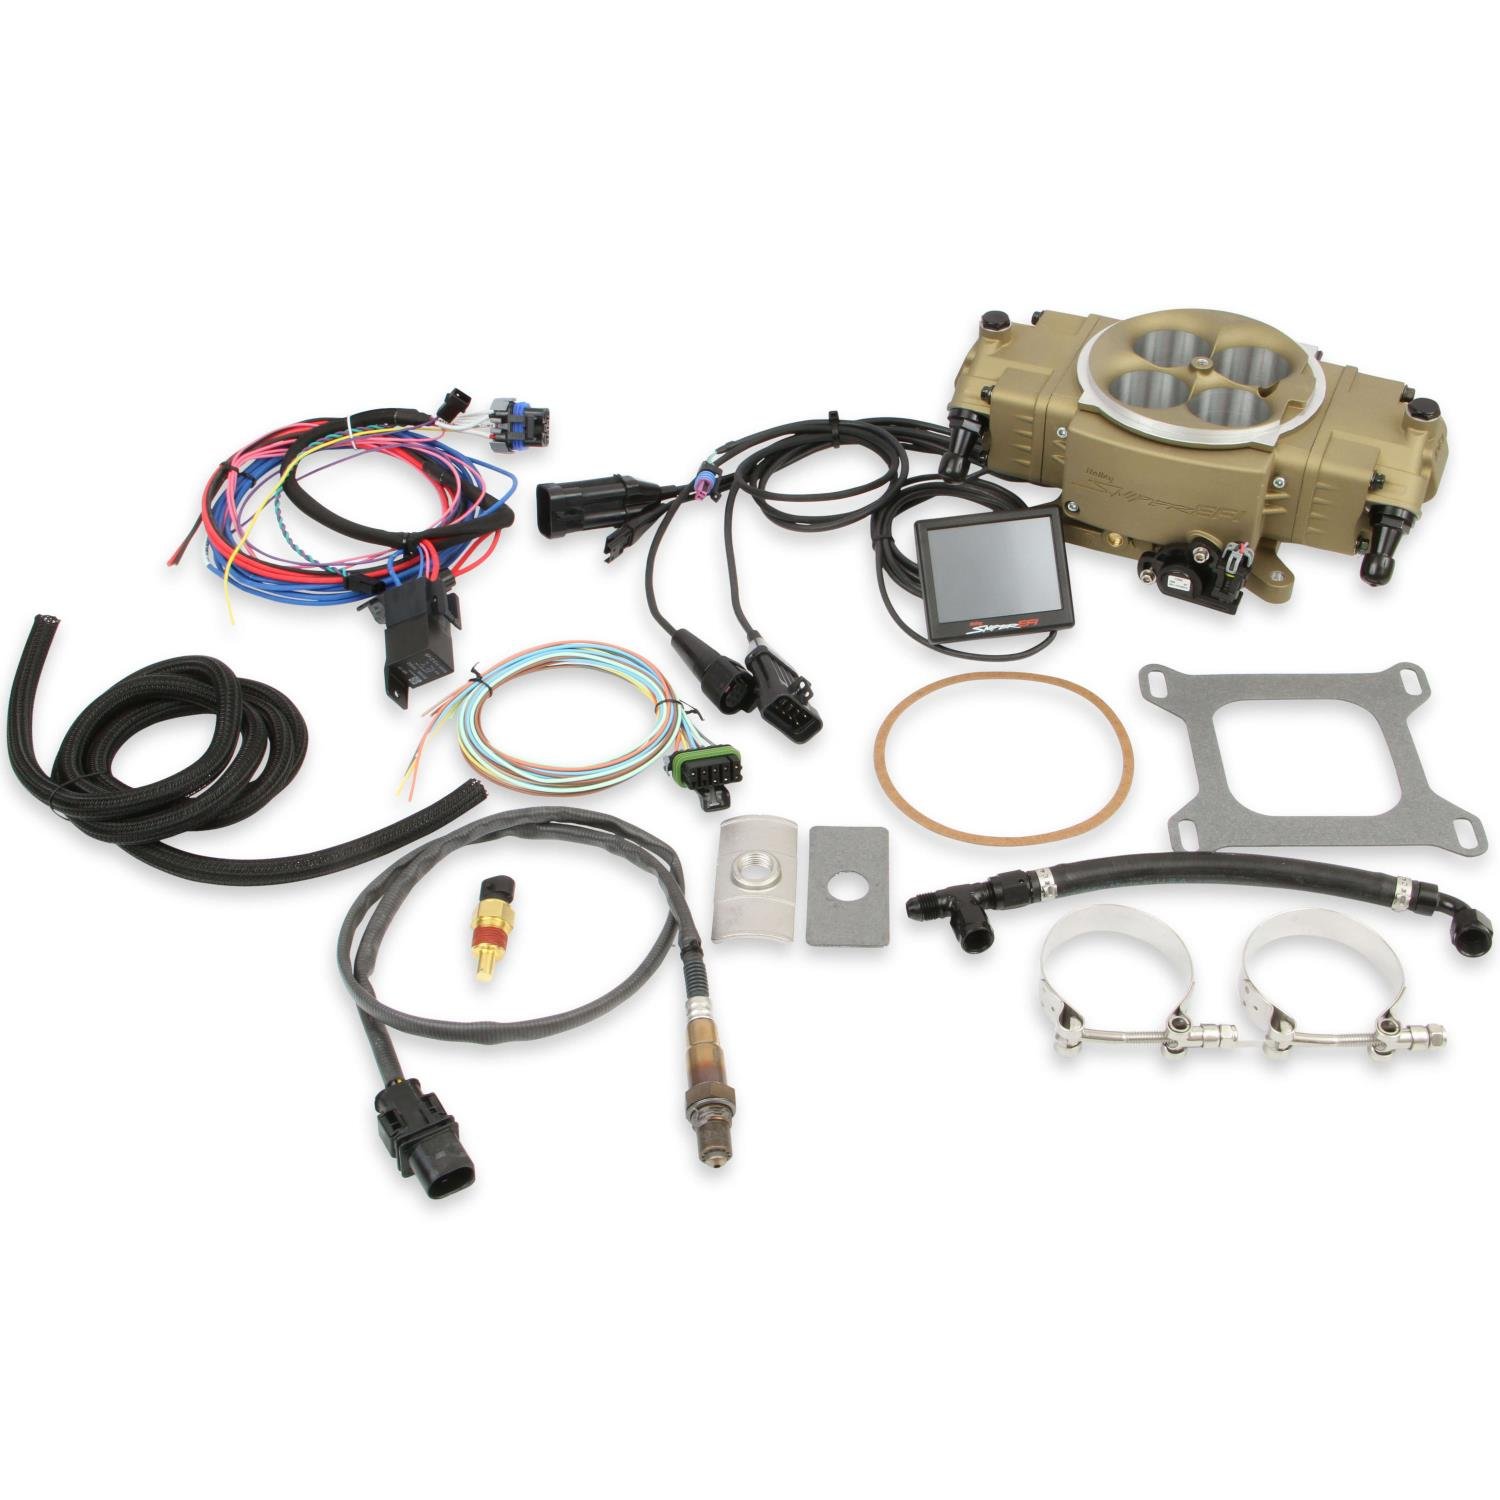 Super Sniper Stealth 4150 Self-Tuning Fuel Injection System [Gold Finish]